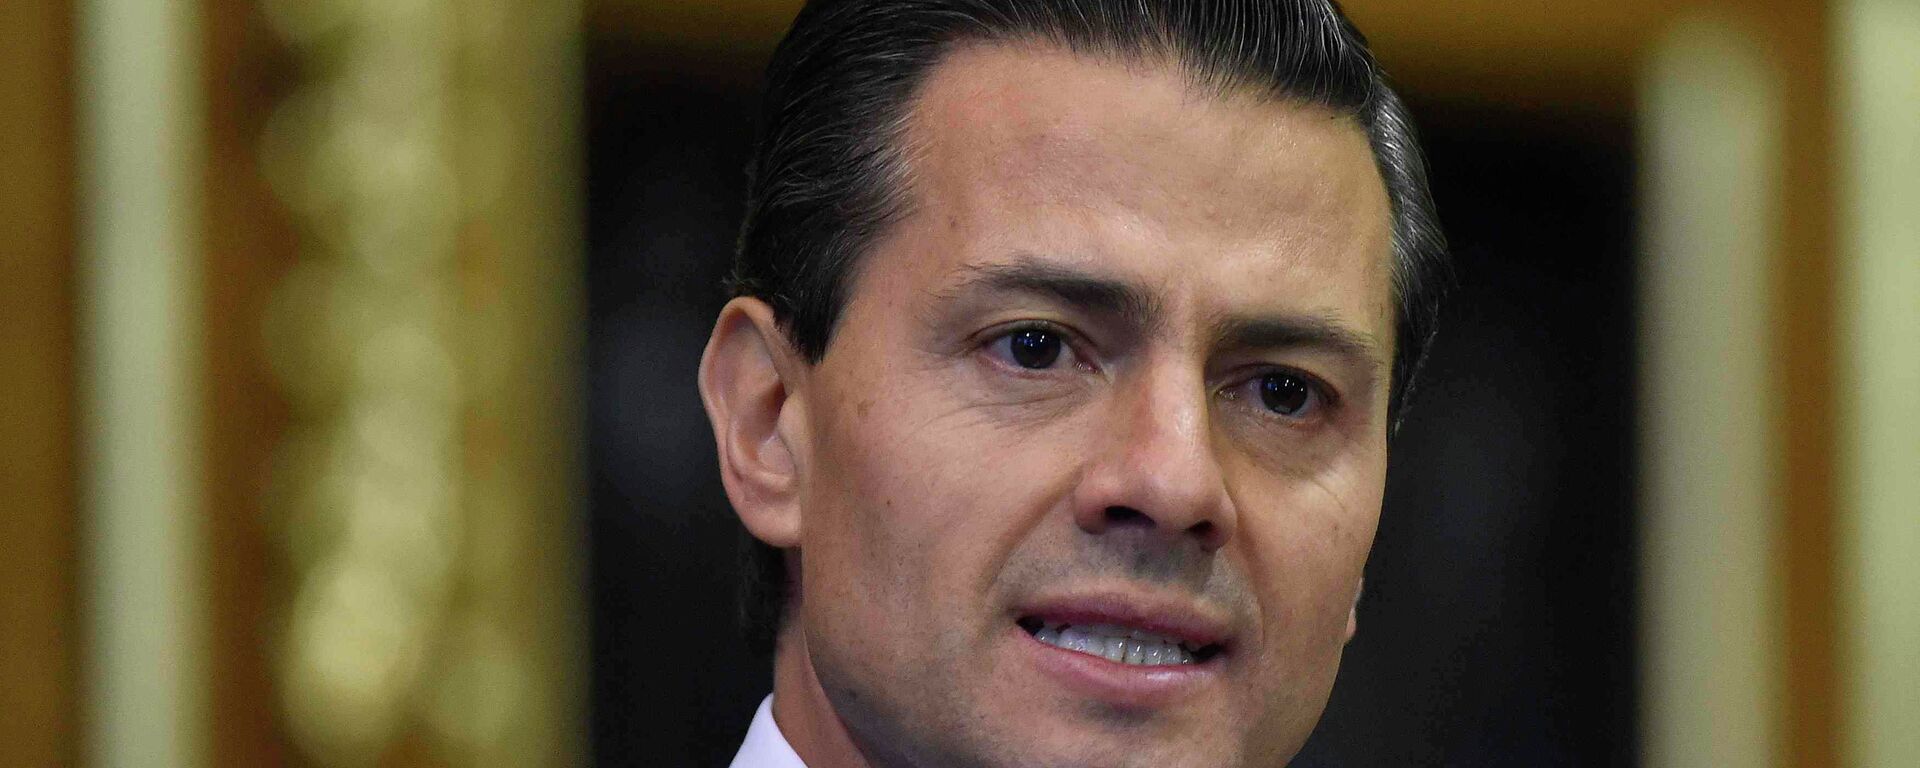 Mexico's President Enrique Pena Nieto delivers an address to members of the British All-Party Parliamentary Group at the Houses of Parliament in London, Tuesday, March 3, 2015 - Sputnik Mundo, 1920, 25.08.2021